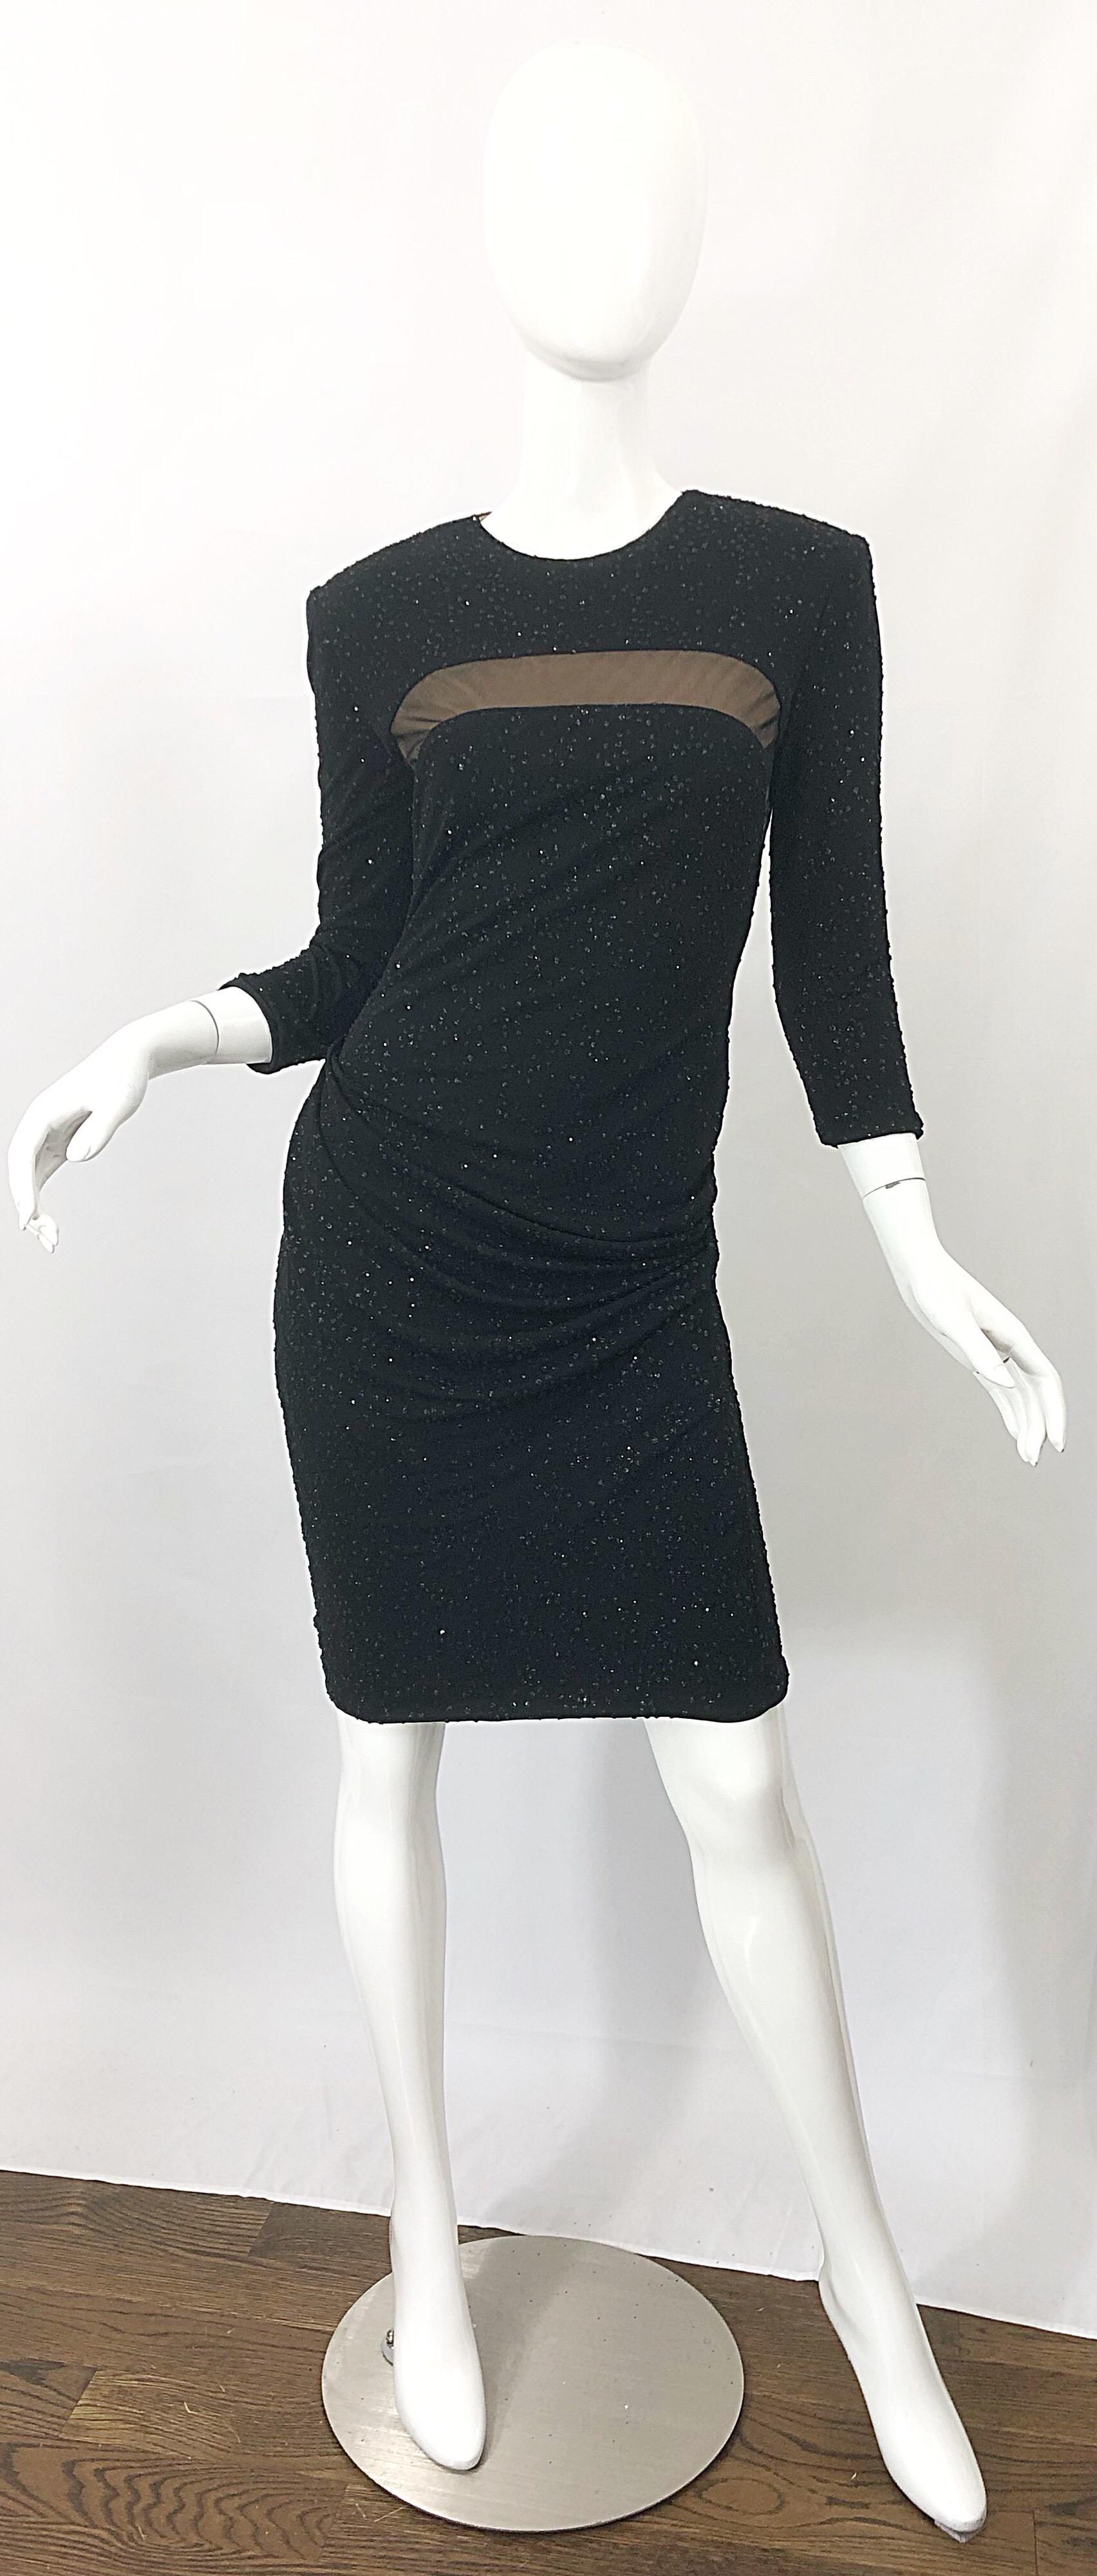 Sexy 90s CD GREENE for Bergdorf Goodman black + nude illusion rayon jersey sparkle glitter 3/4 sleeve bodycon dress! Greene has been a celebrity go-to for decades. He is known for his impeccable designs, with figure flattering cuts and anything